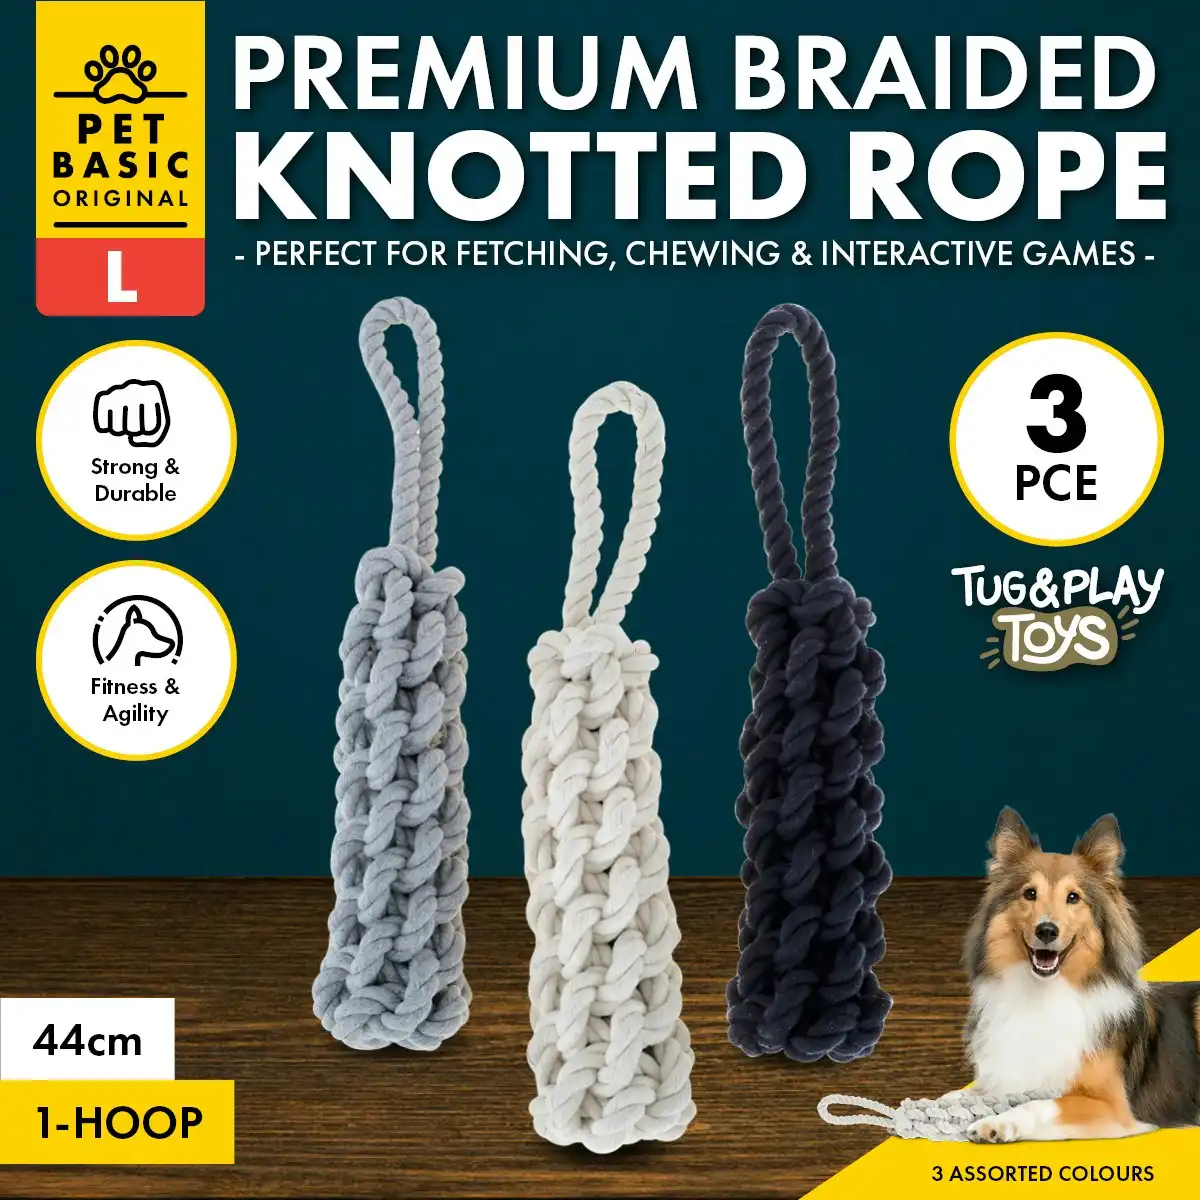 Pet Basic 3PCE Premium Braided Knotted Rope Large Natural Fibres 44cm